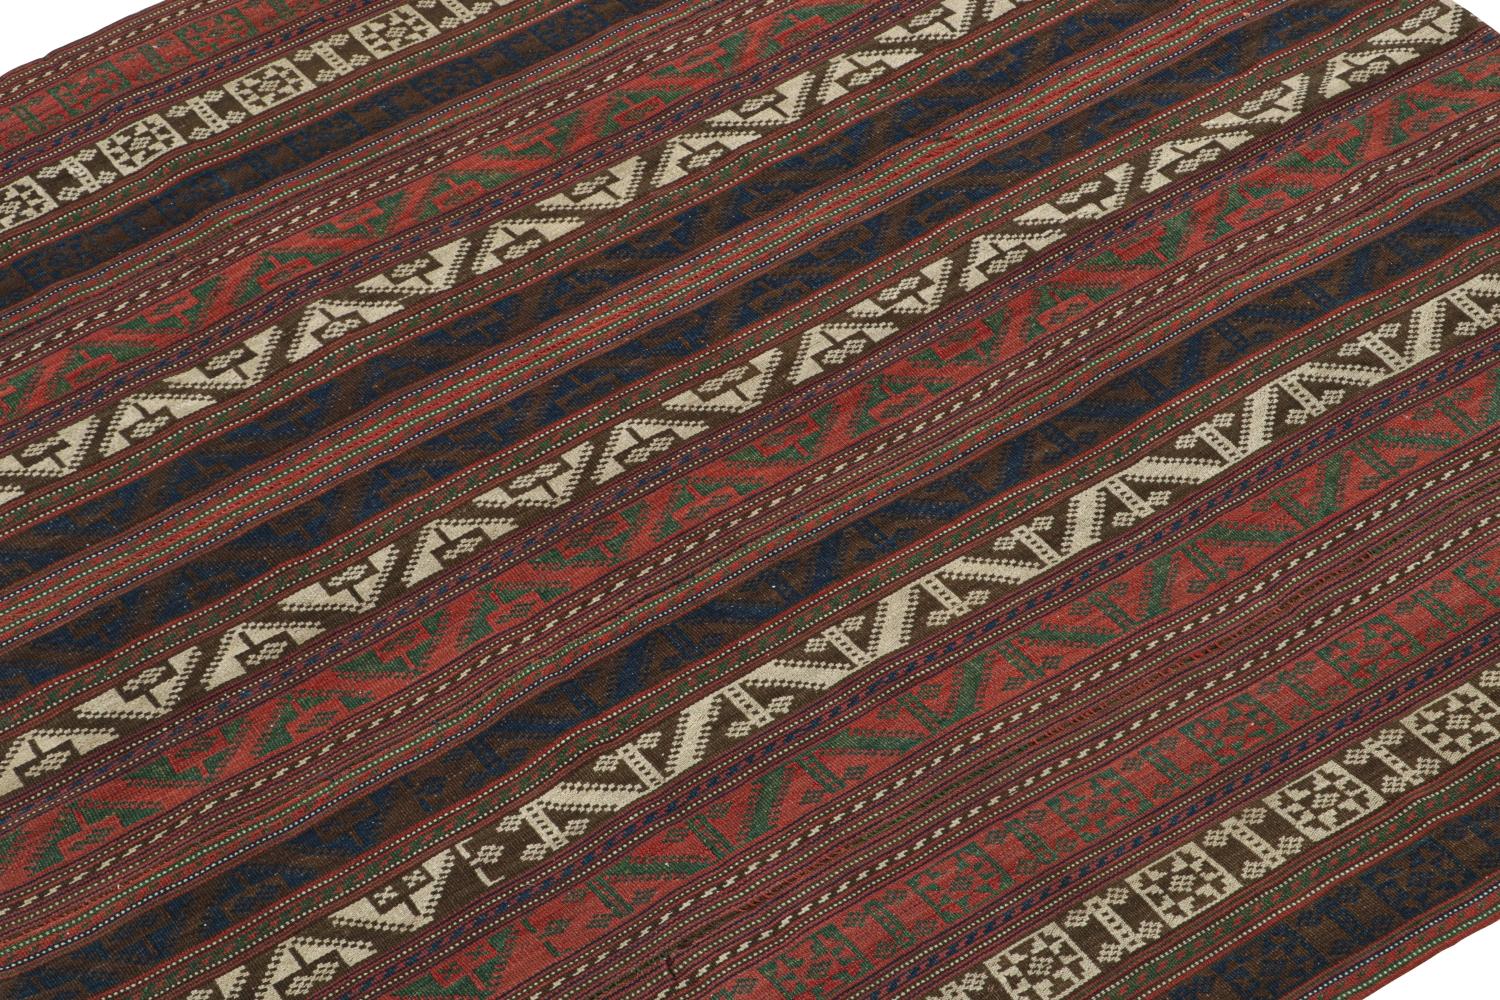 This vintage 6x6 Persian Kilim is a square Jajim flat weave, believed to originate in Kurdistan—handwoven in wool circa 1950-1960.

On The Design: 

The Jajim flat weave technique refers to the practice of combining multiple pieces into one